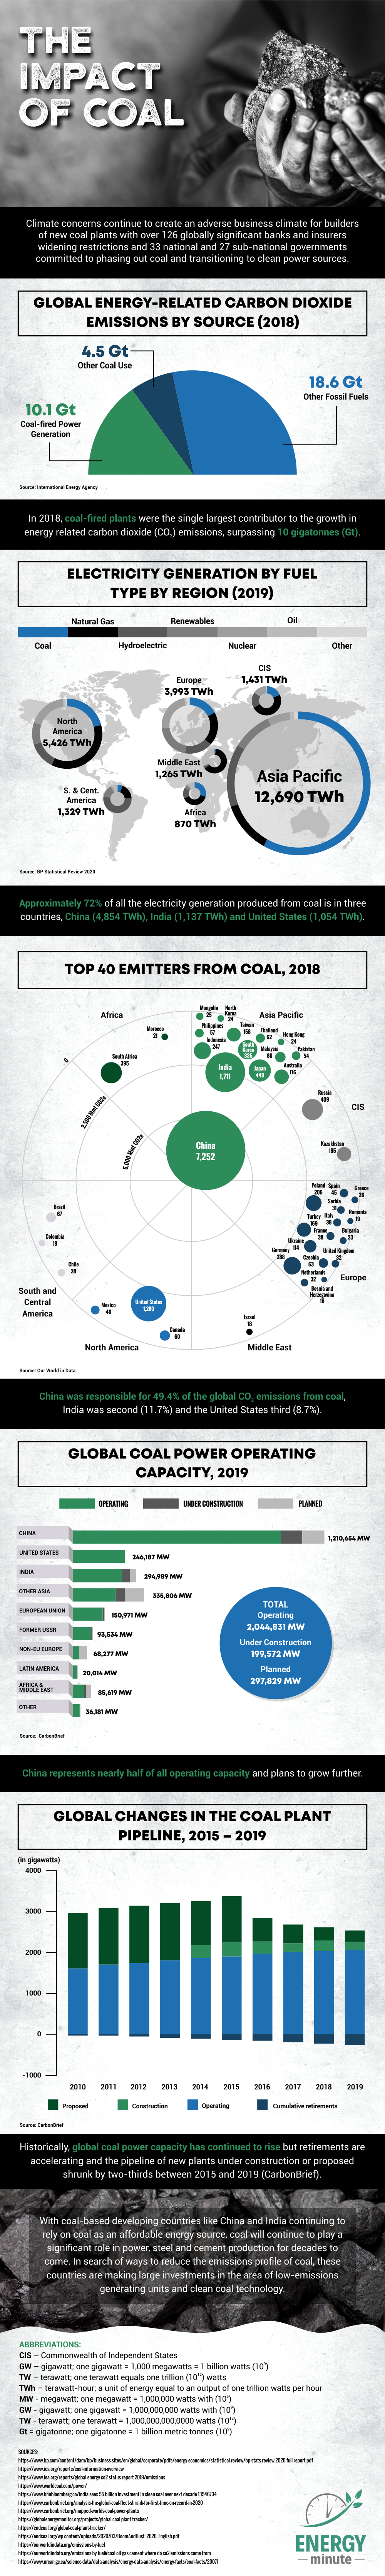 The Environmental Impact of the Coal Industry